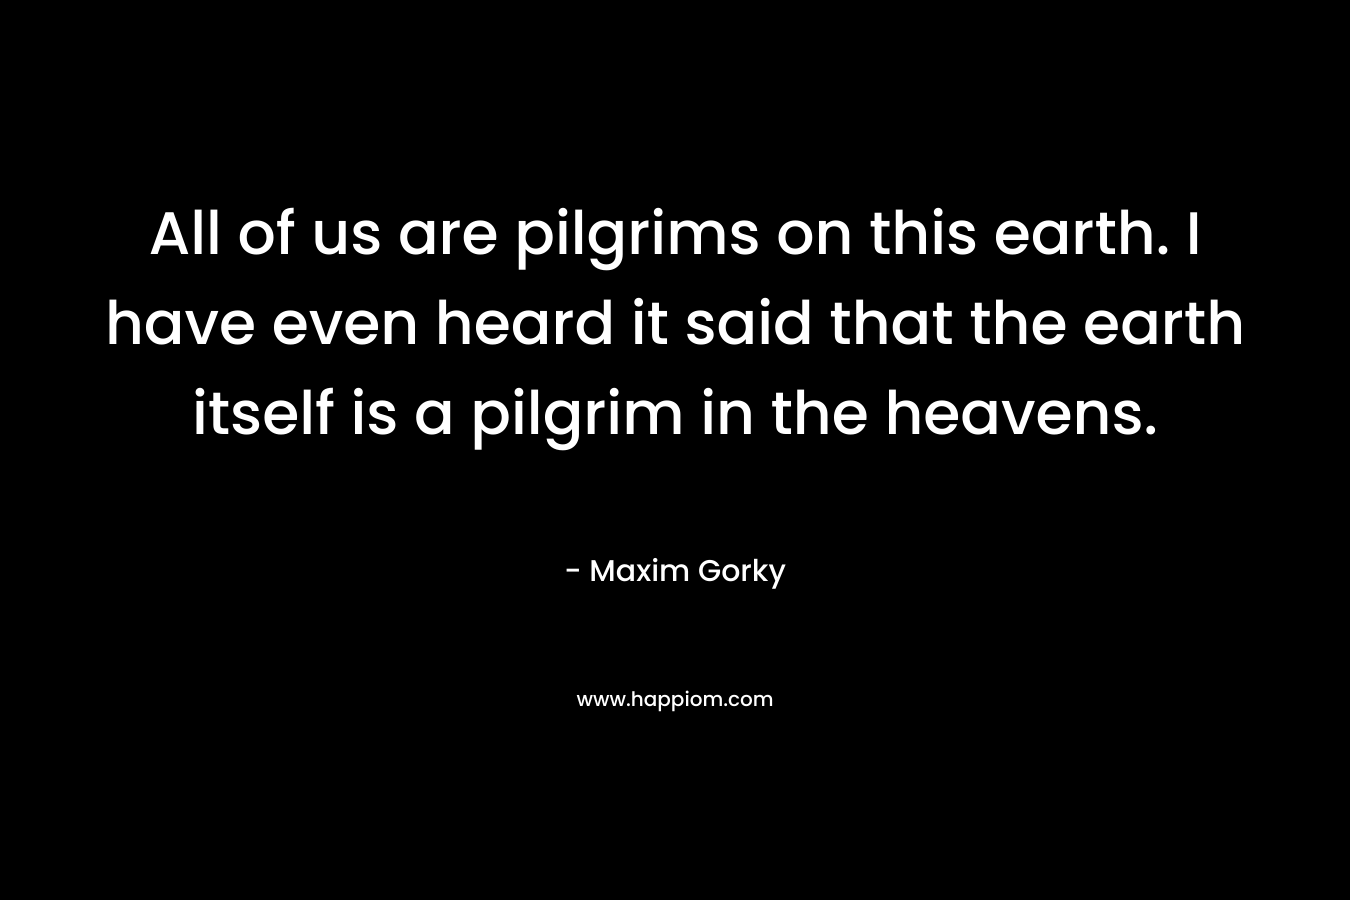 All of us are pilgrims on this earth. I have even heard it said that the earth itself is a pilgrim in the heavens. – Maxim Gorky